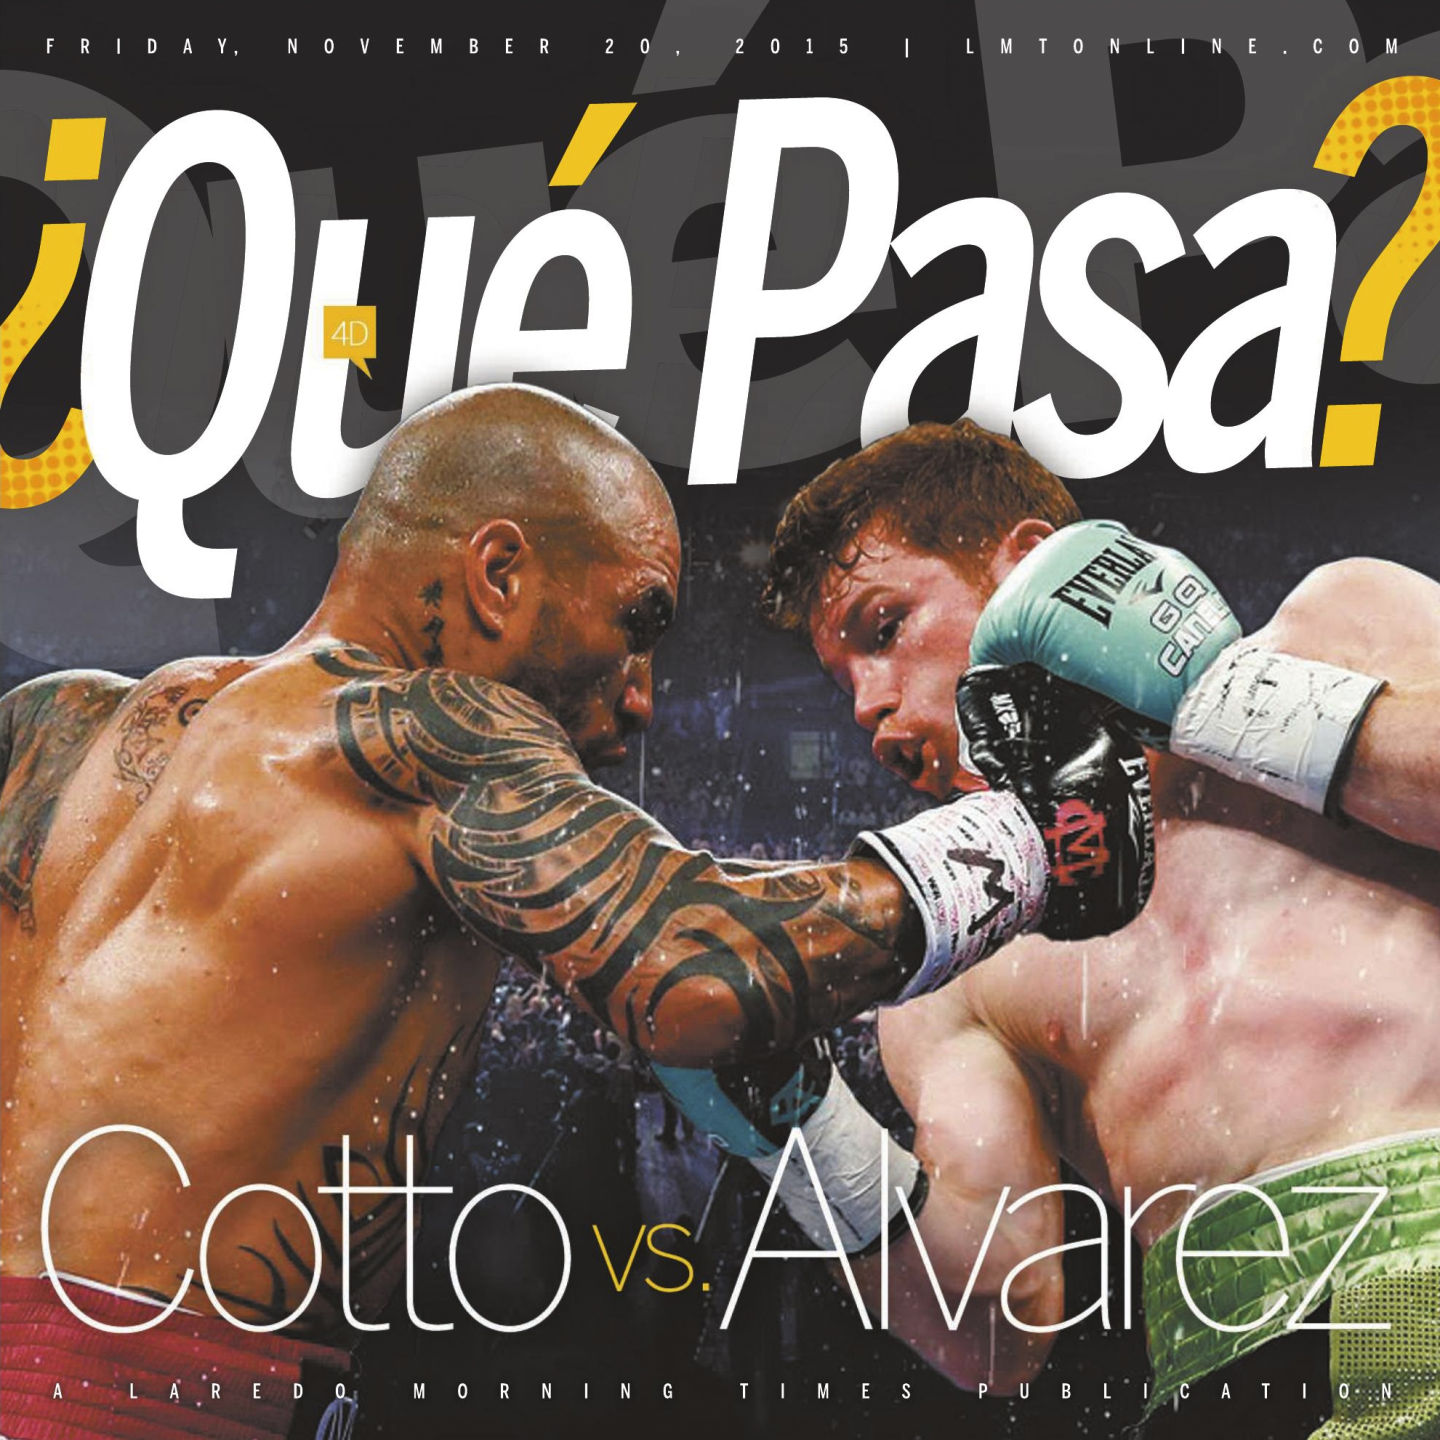 Cotto v. Canelo fight may be worth admission